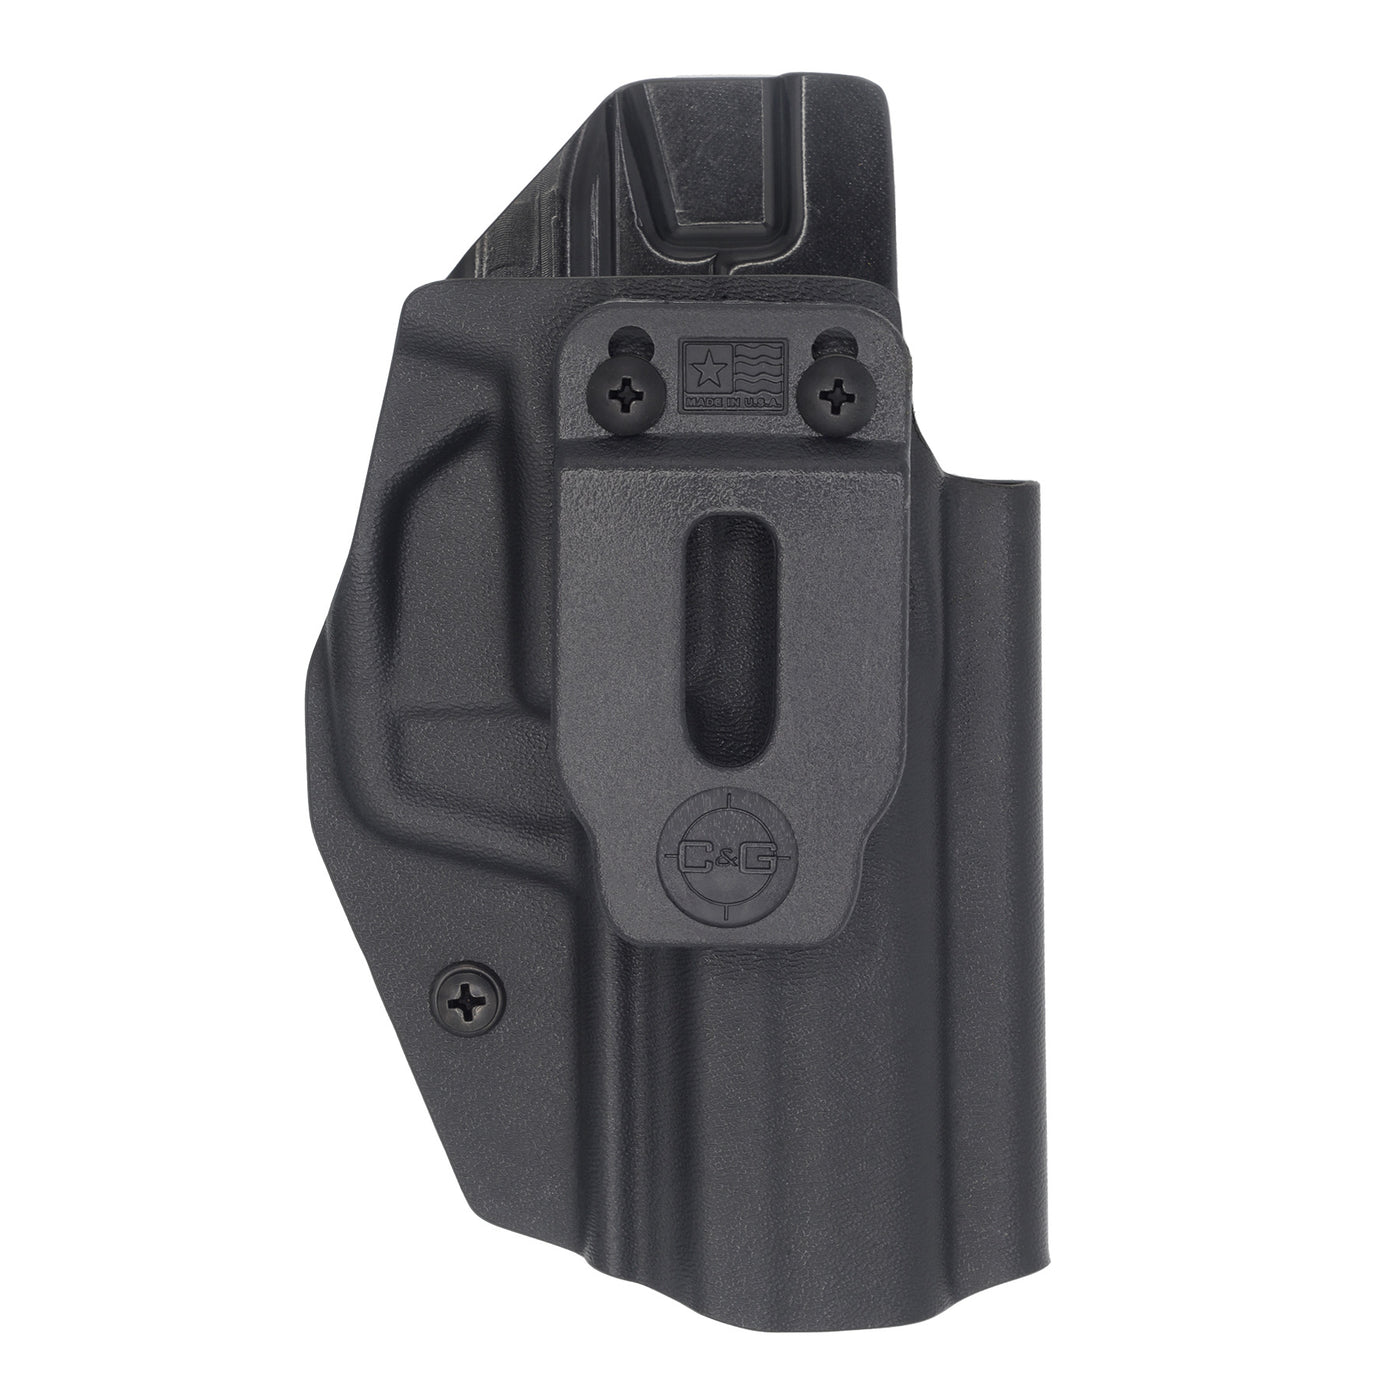 This is a quickship C&G Holsters IWB inside the waistband Holster for the Heckler and Koch HK45c.